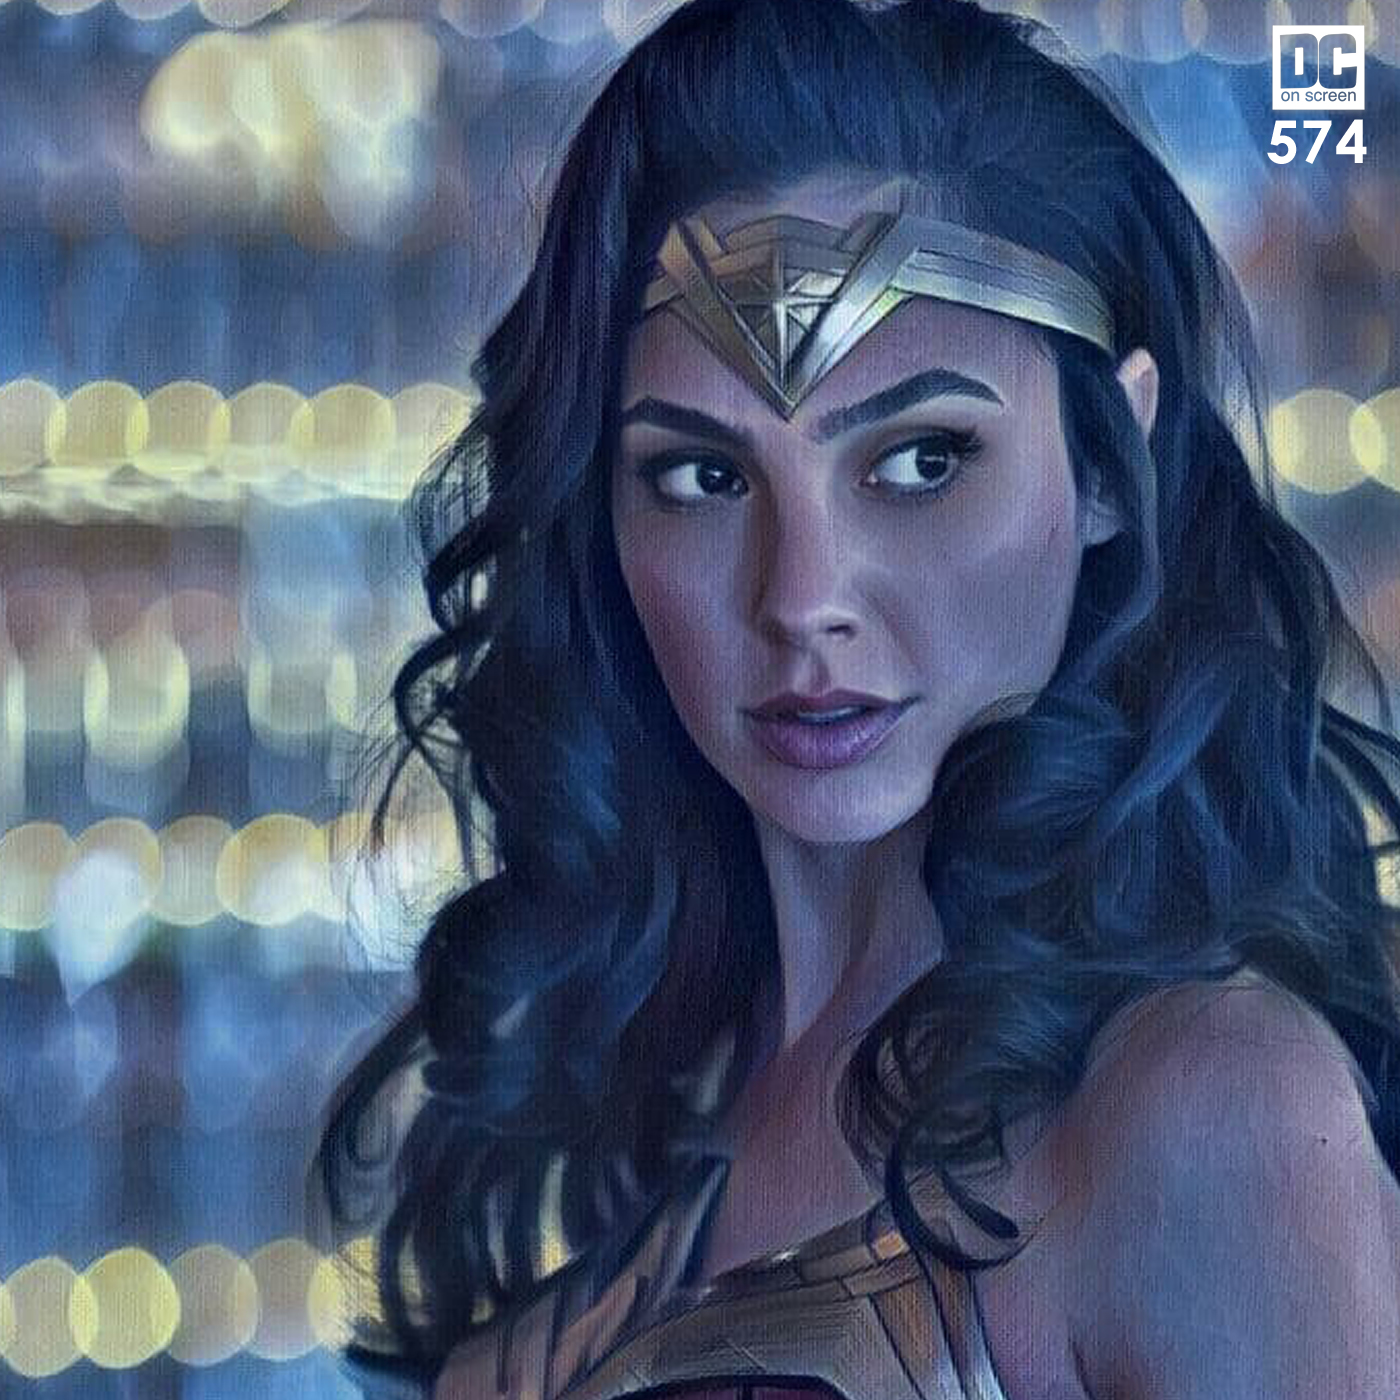 DC on SCREEN Podcast: Wonder Woman 1984 Trailer Reactions